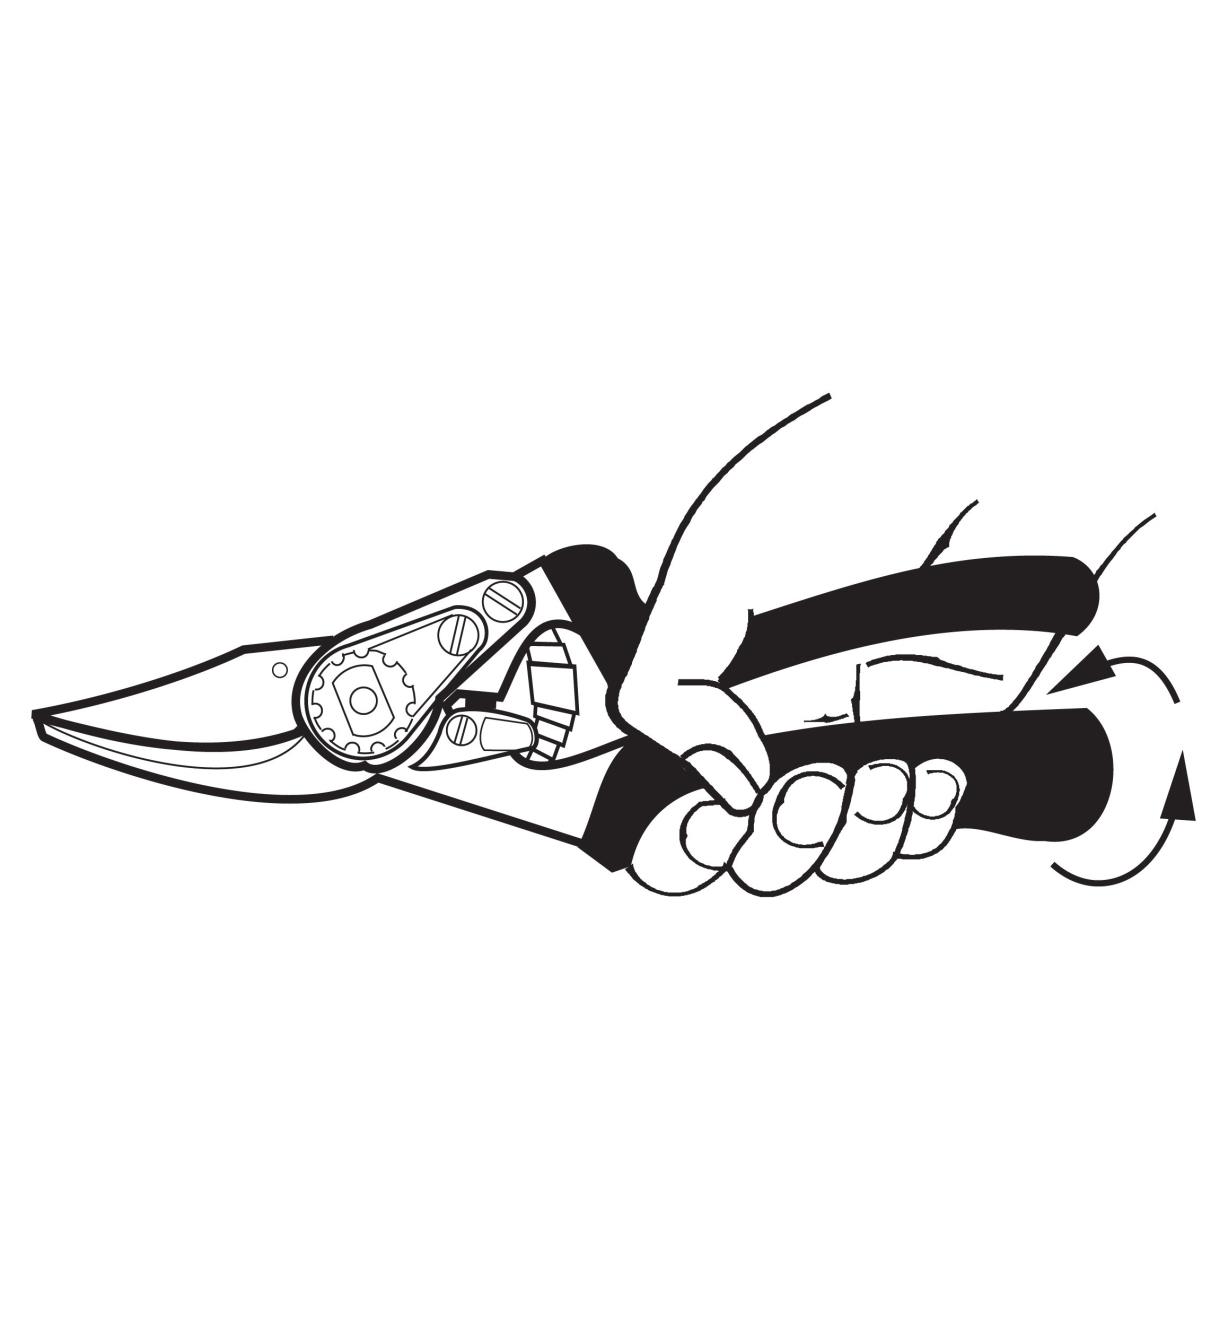 Illustration of lower handle rotating as the hand squeezes the pruner handles